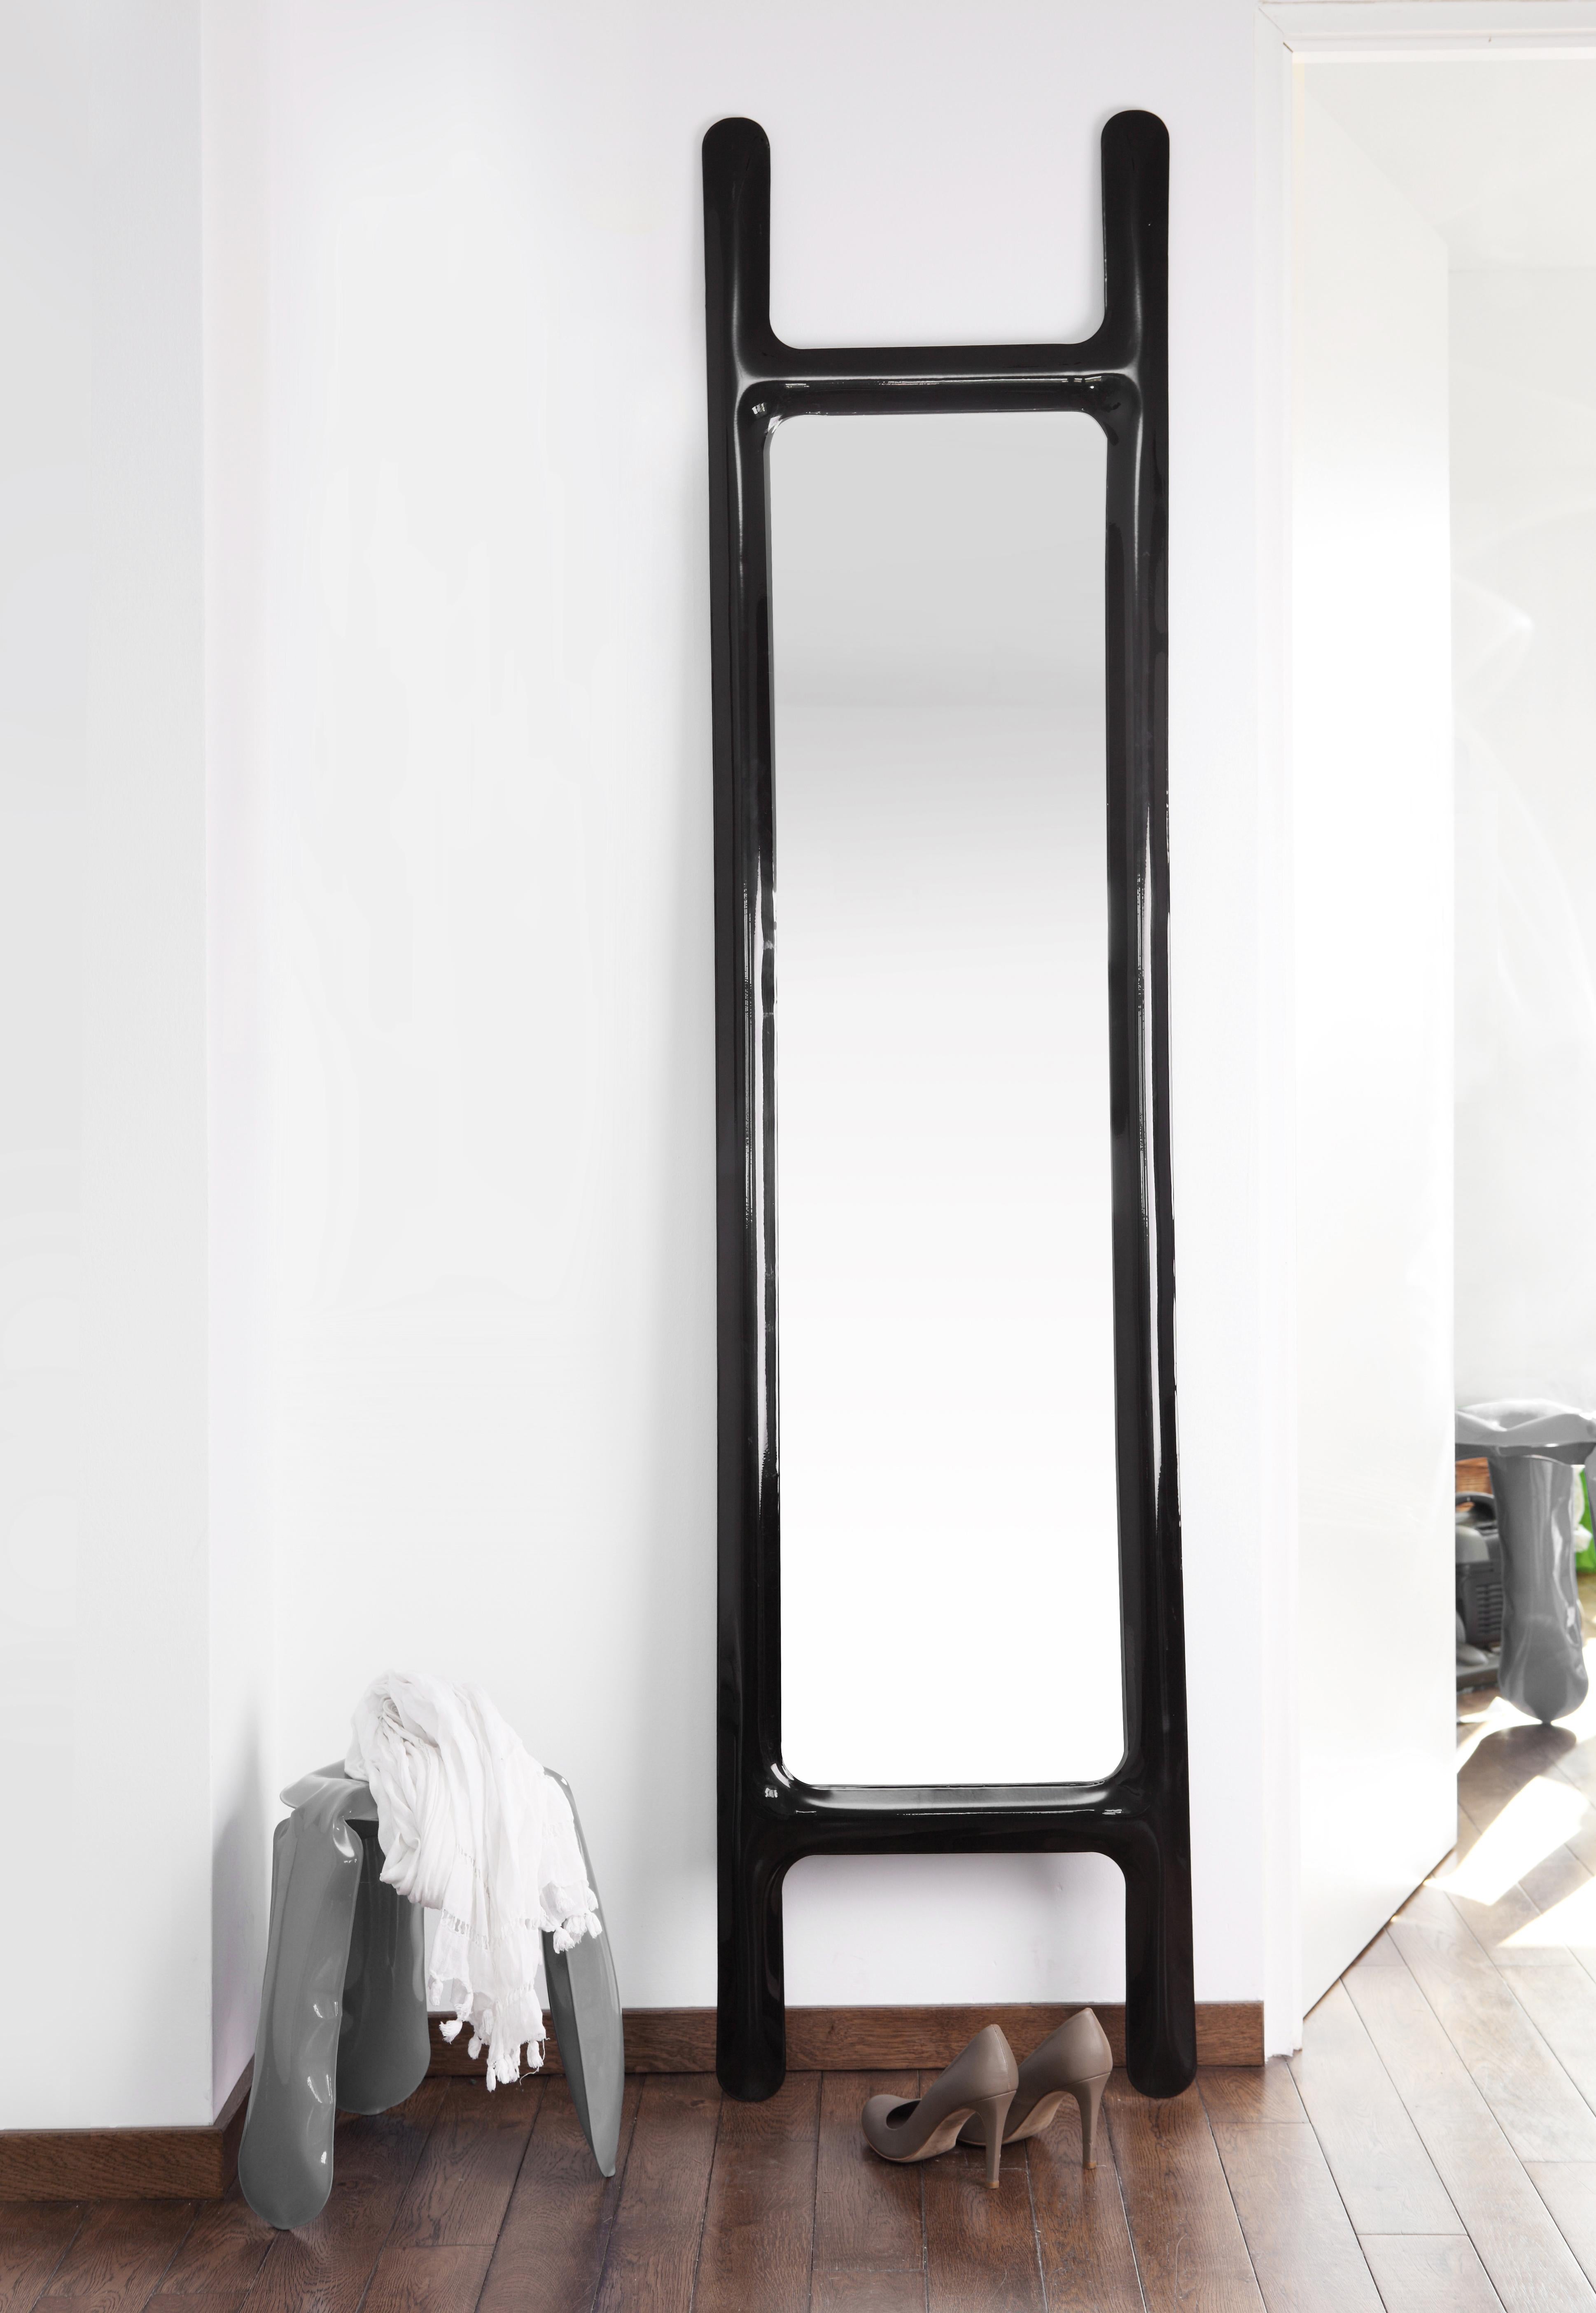 Drab mirror by Zieta 
Beige

Colored steel (black, white or grey) or stainless steel (inox).

Measures: 188 x 46 x 6 cm.

Zieta is best known for his collection of stools “Plopp” made through the technologist Fidu. With the same principle